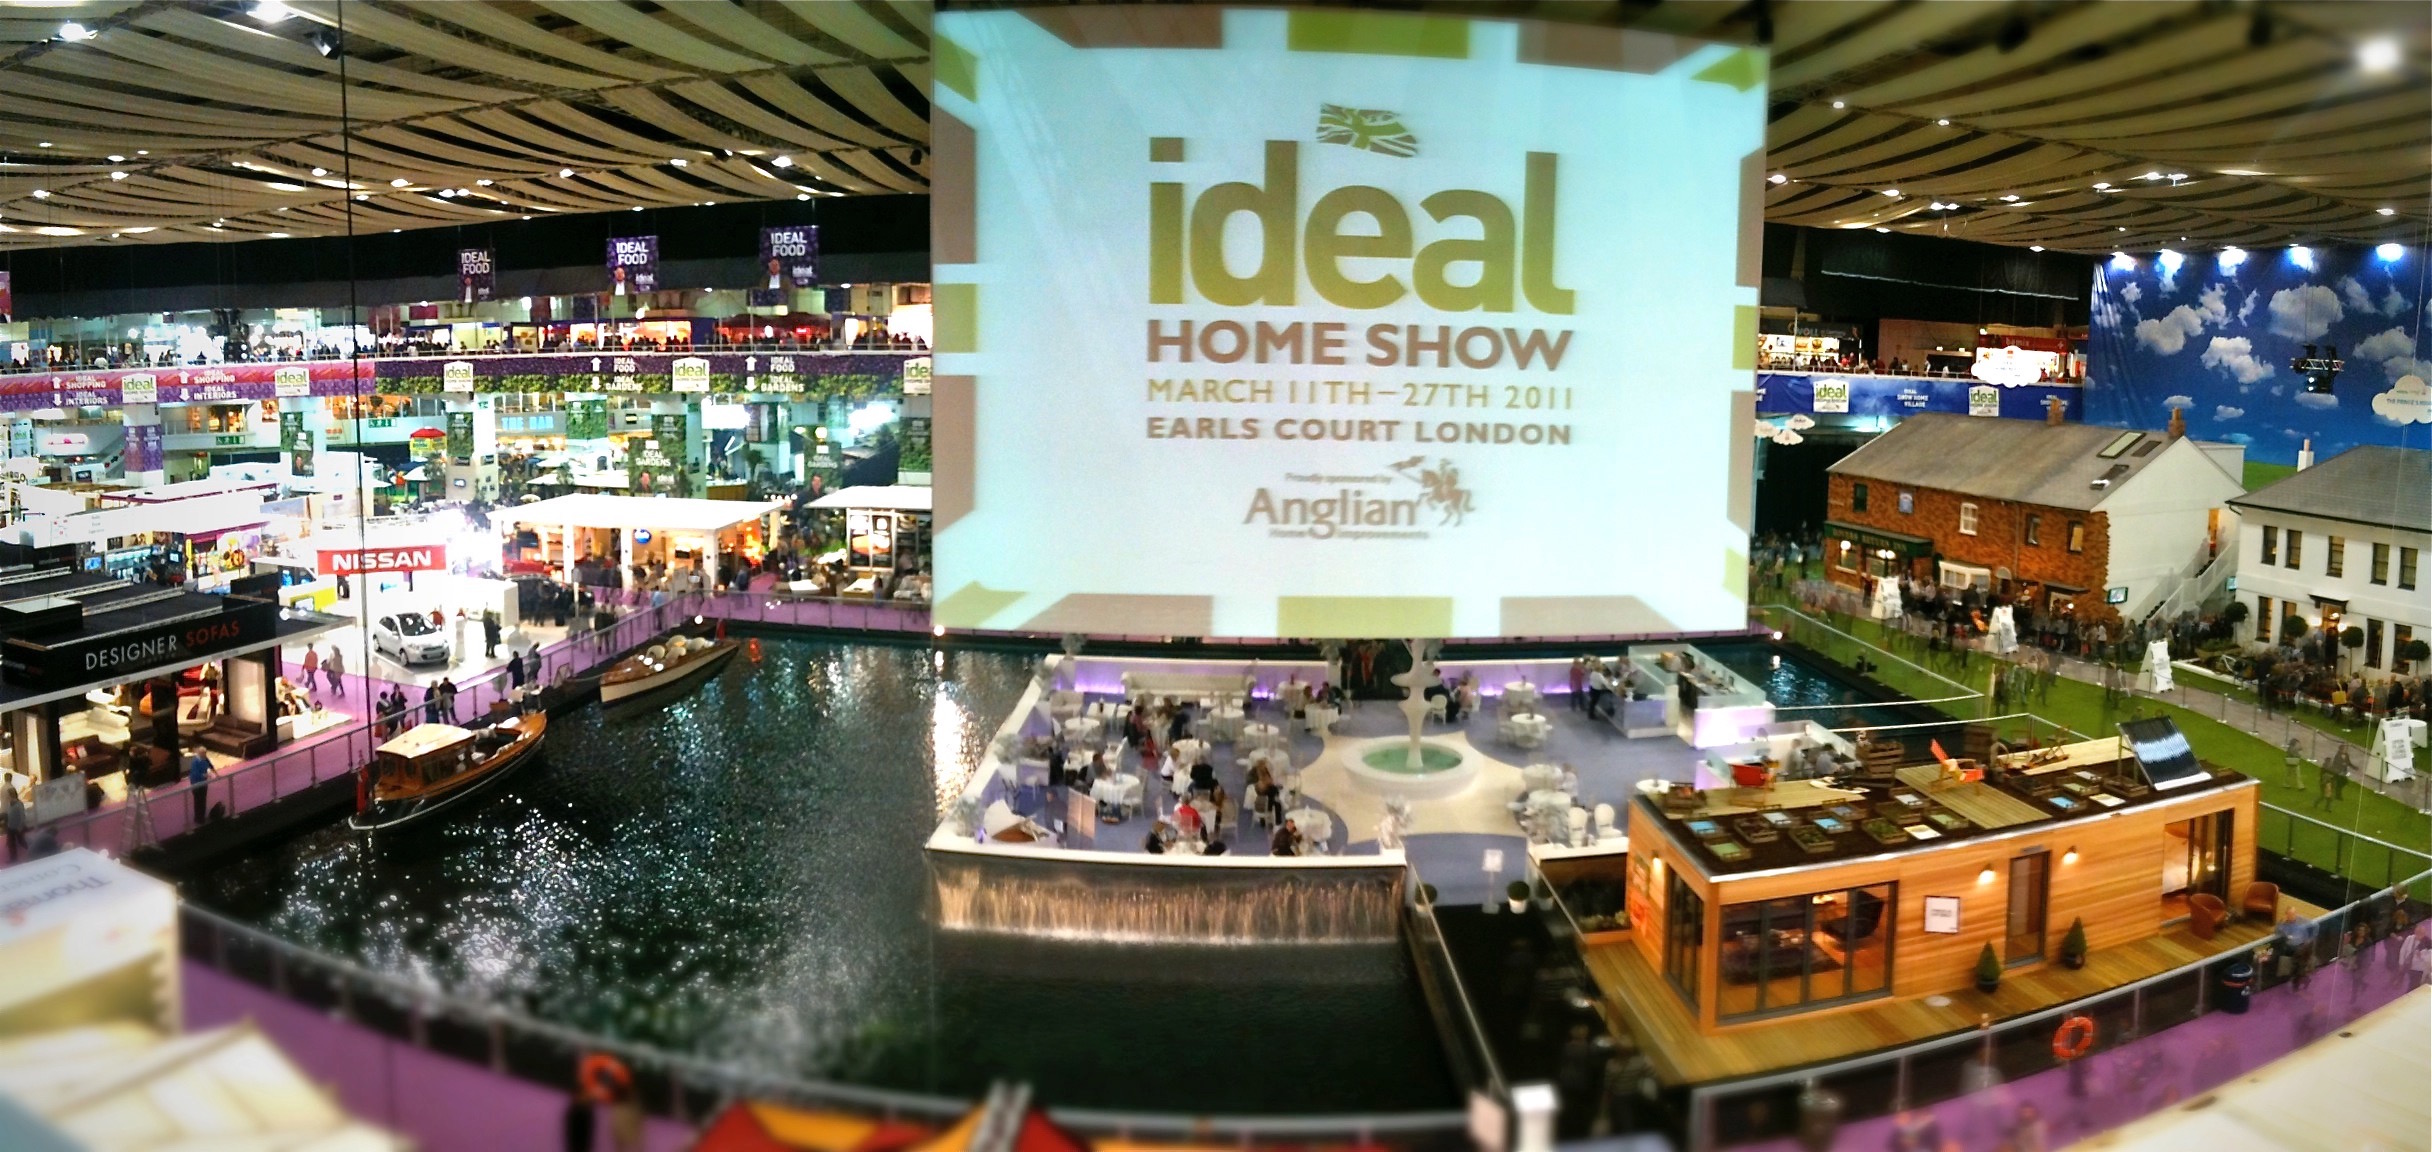 Ecofloatinghomes at Ideal Home Show